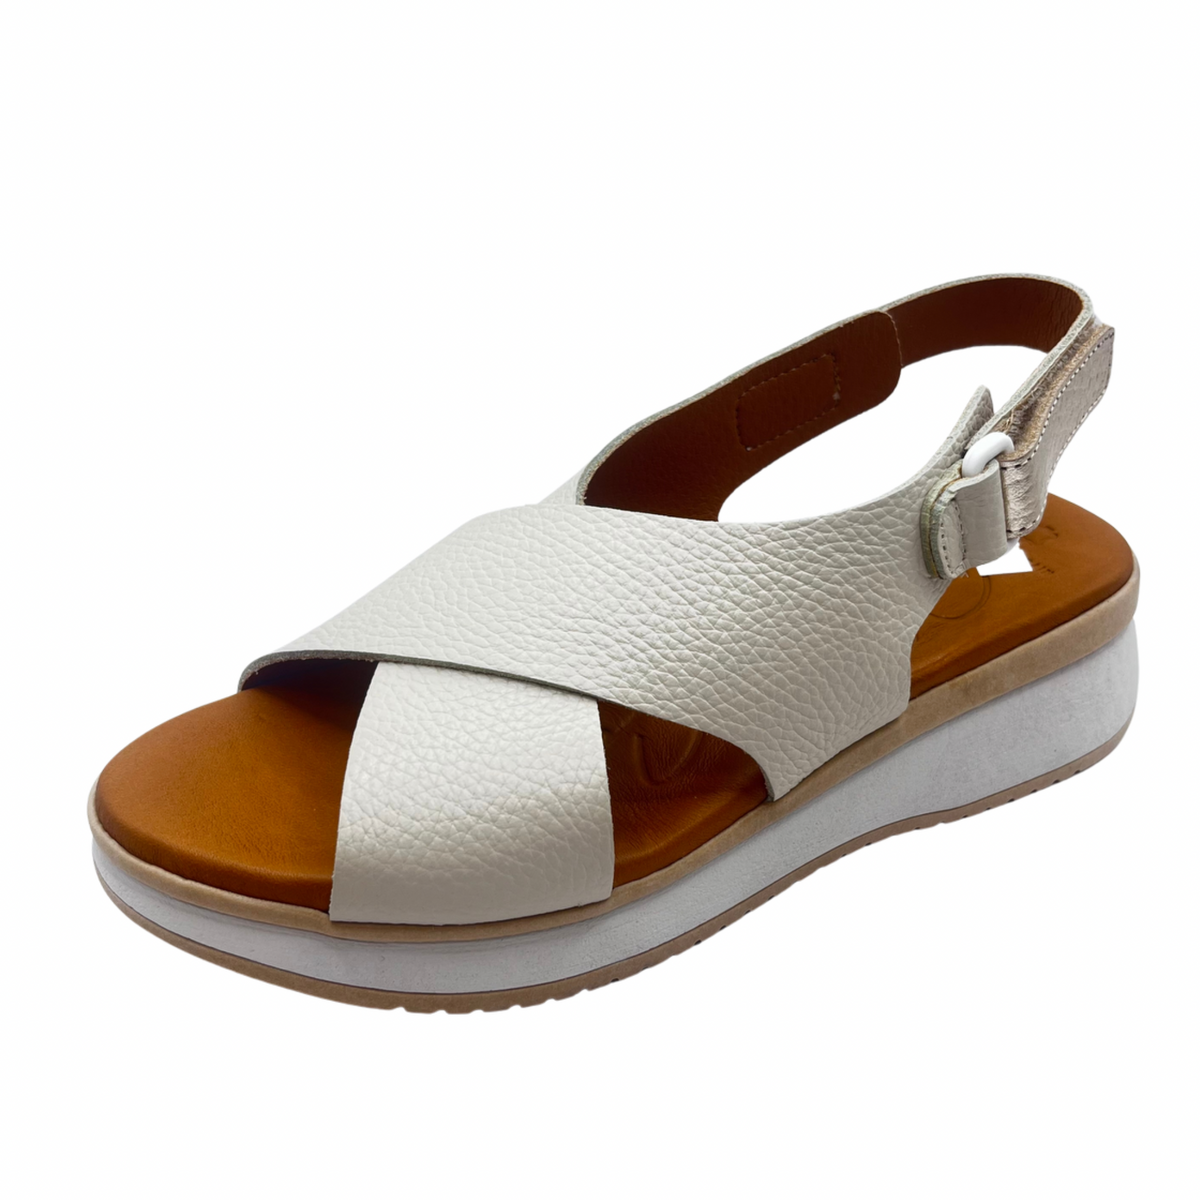 Oh My Sandals Cream Cross Over Wedge Leather Sandal